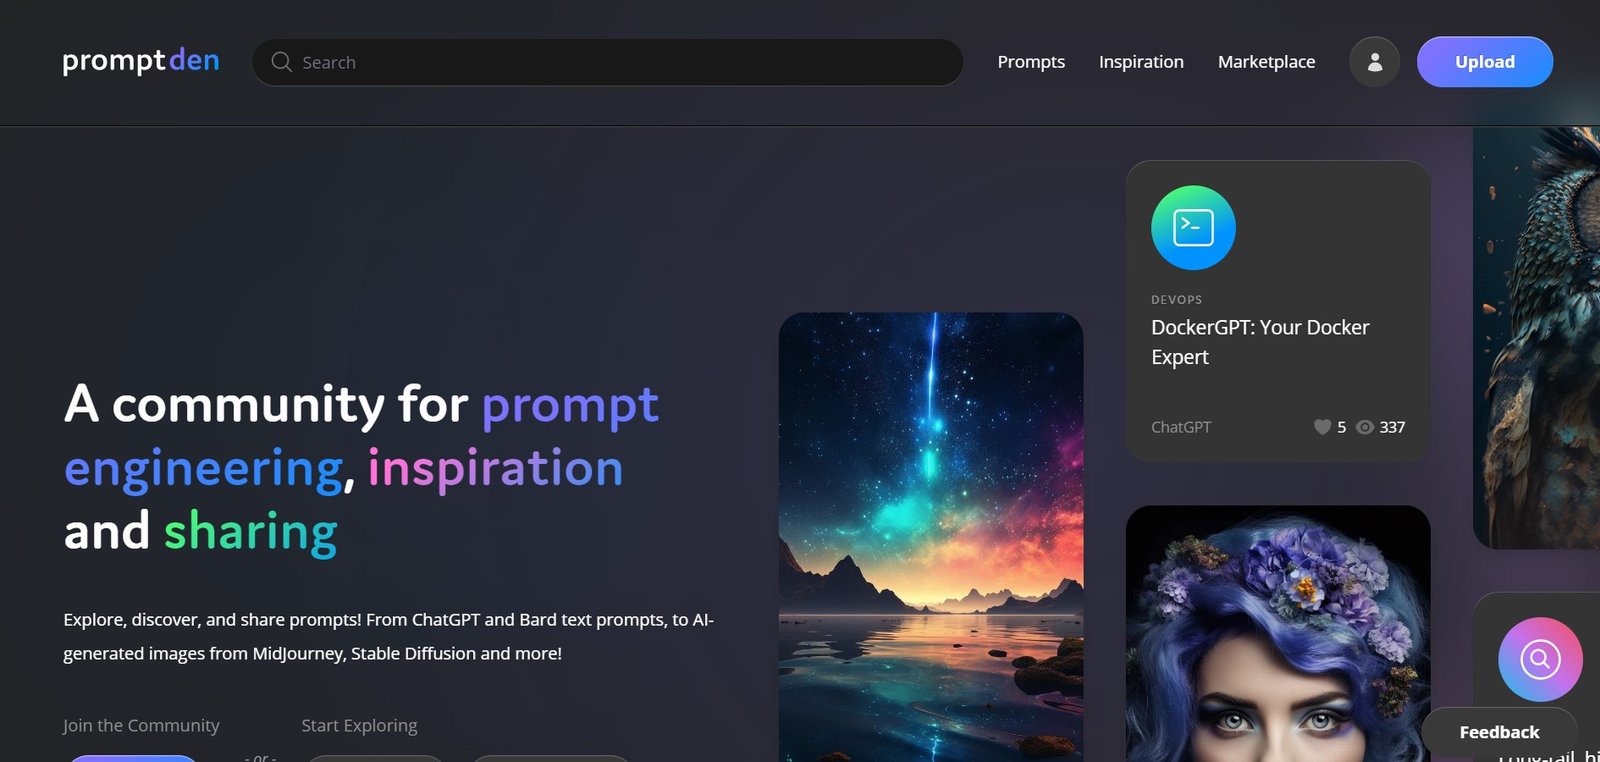 PromptDen is a platform for sharing